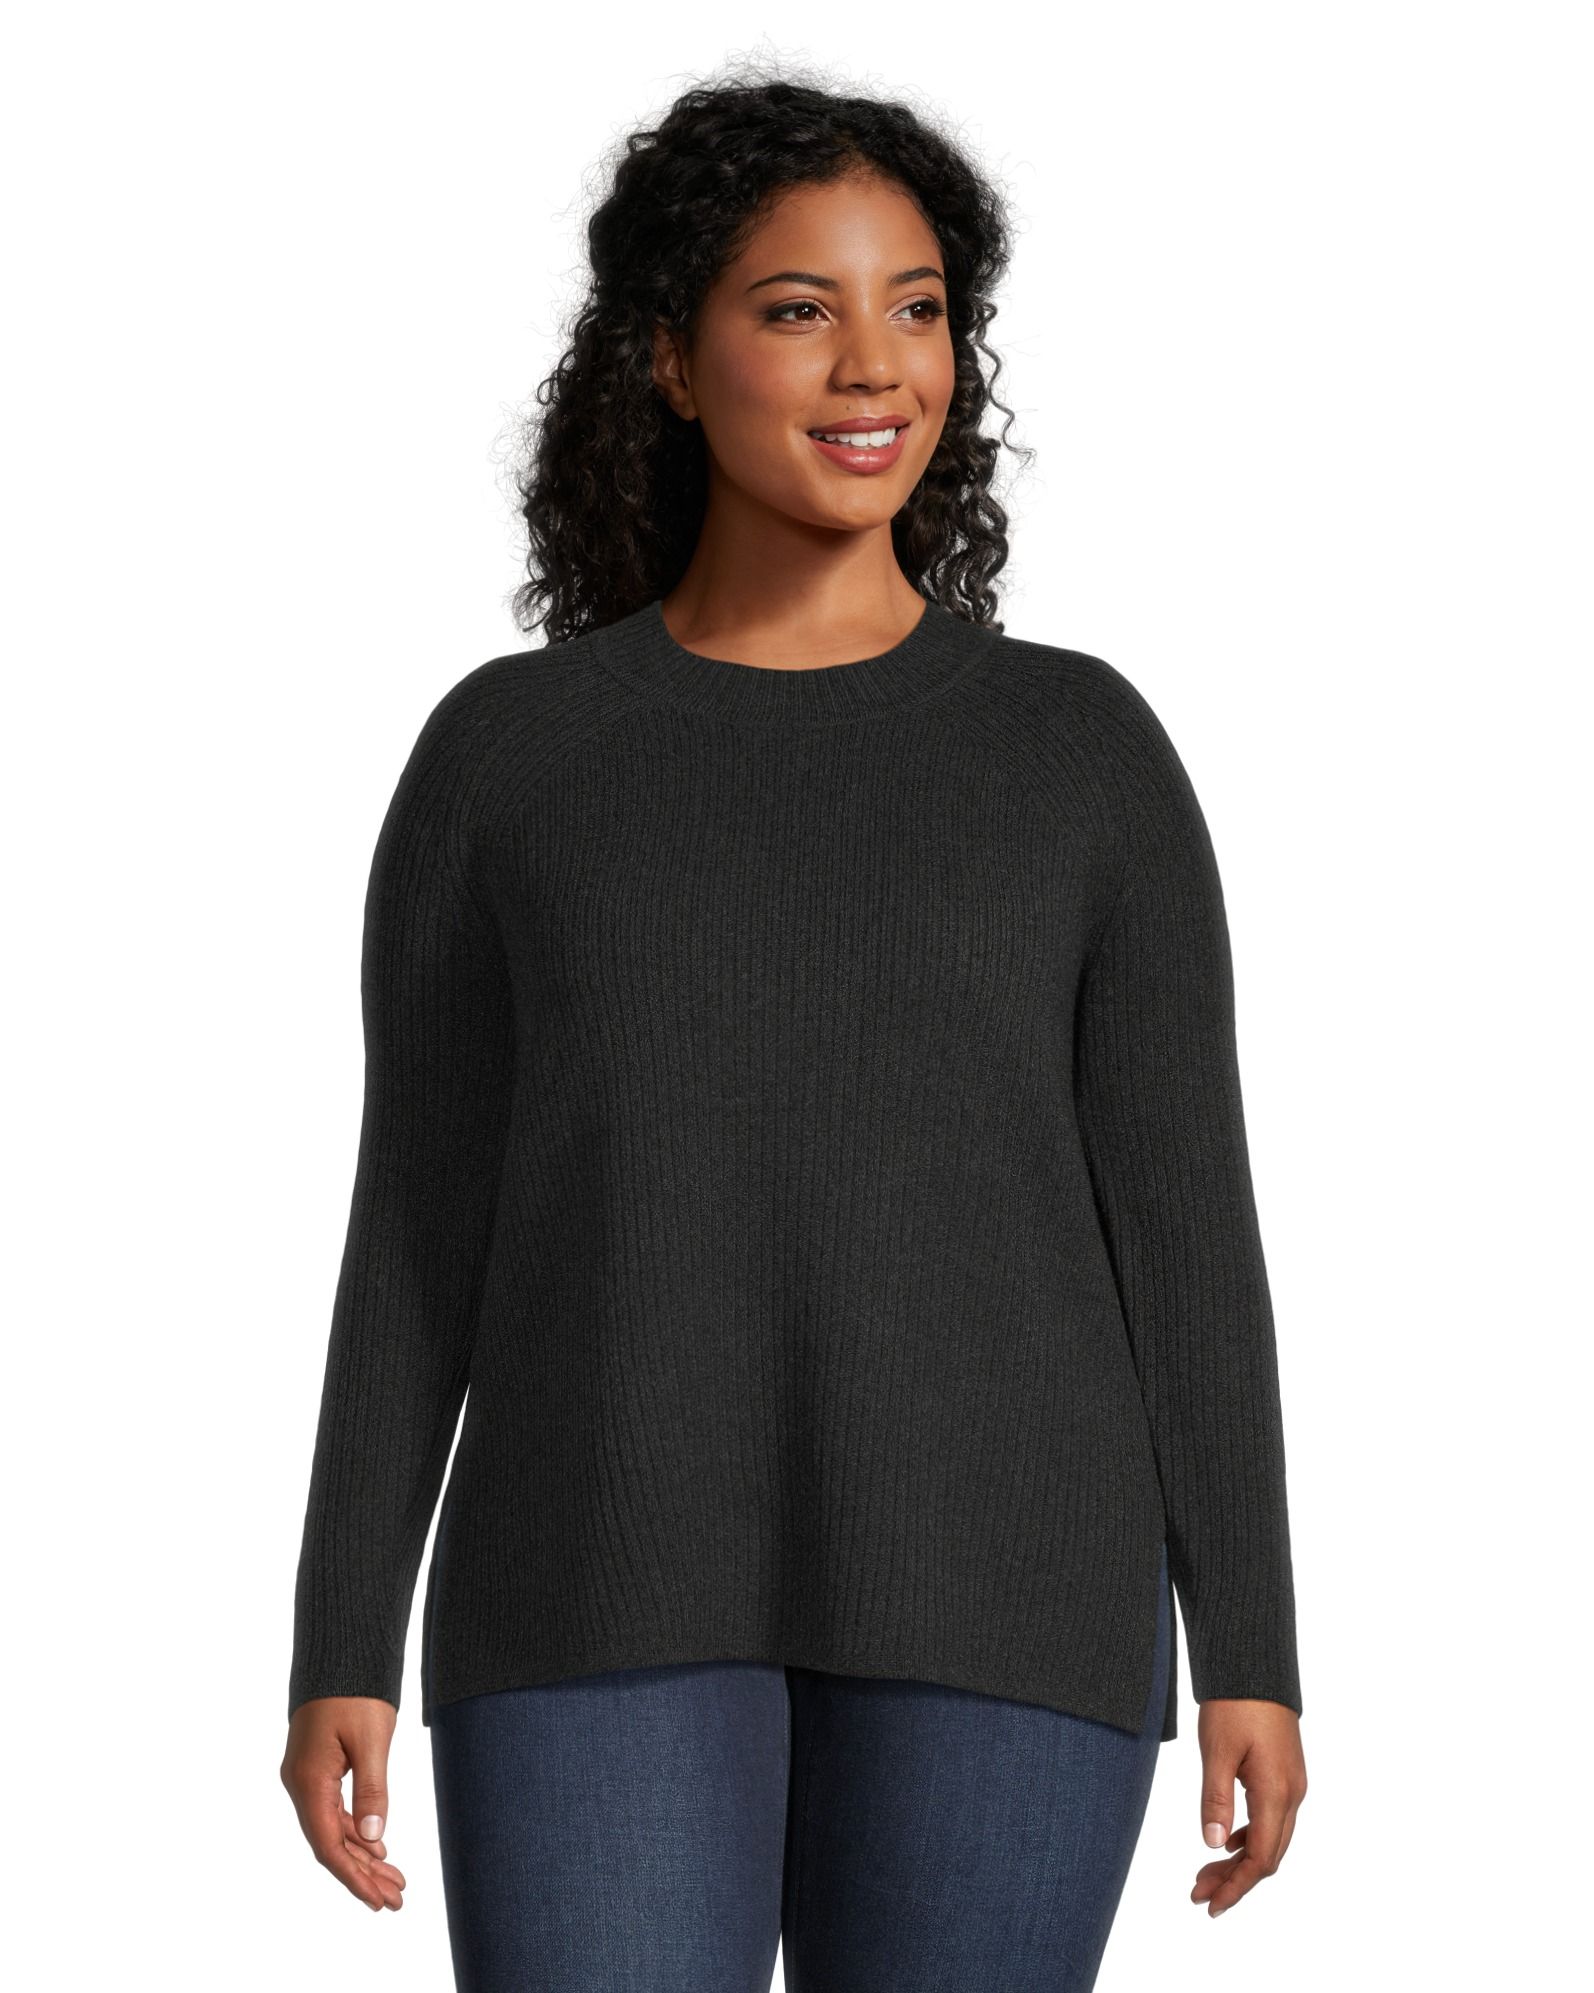 Denver Hayes Women's Semi Fitted Cozy Ribbed Crewneck Pullover